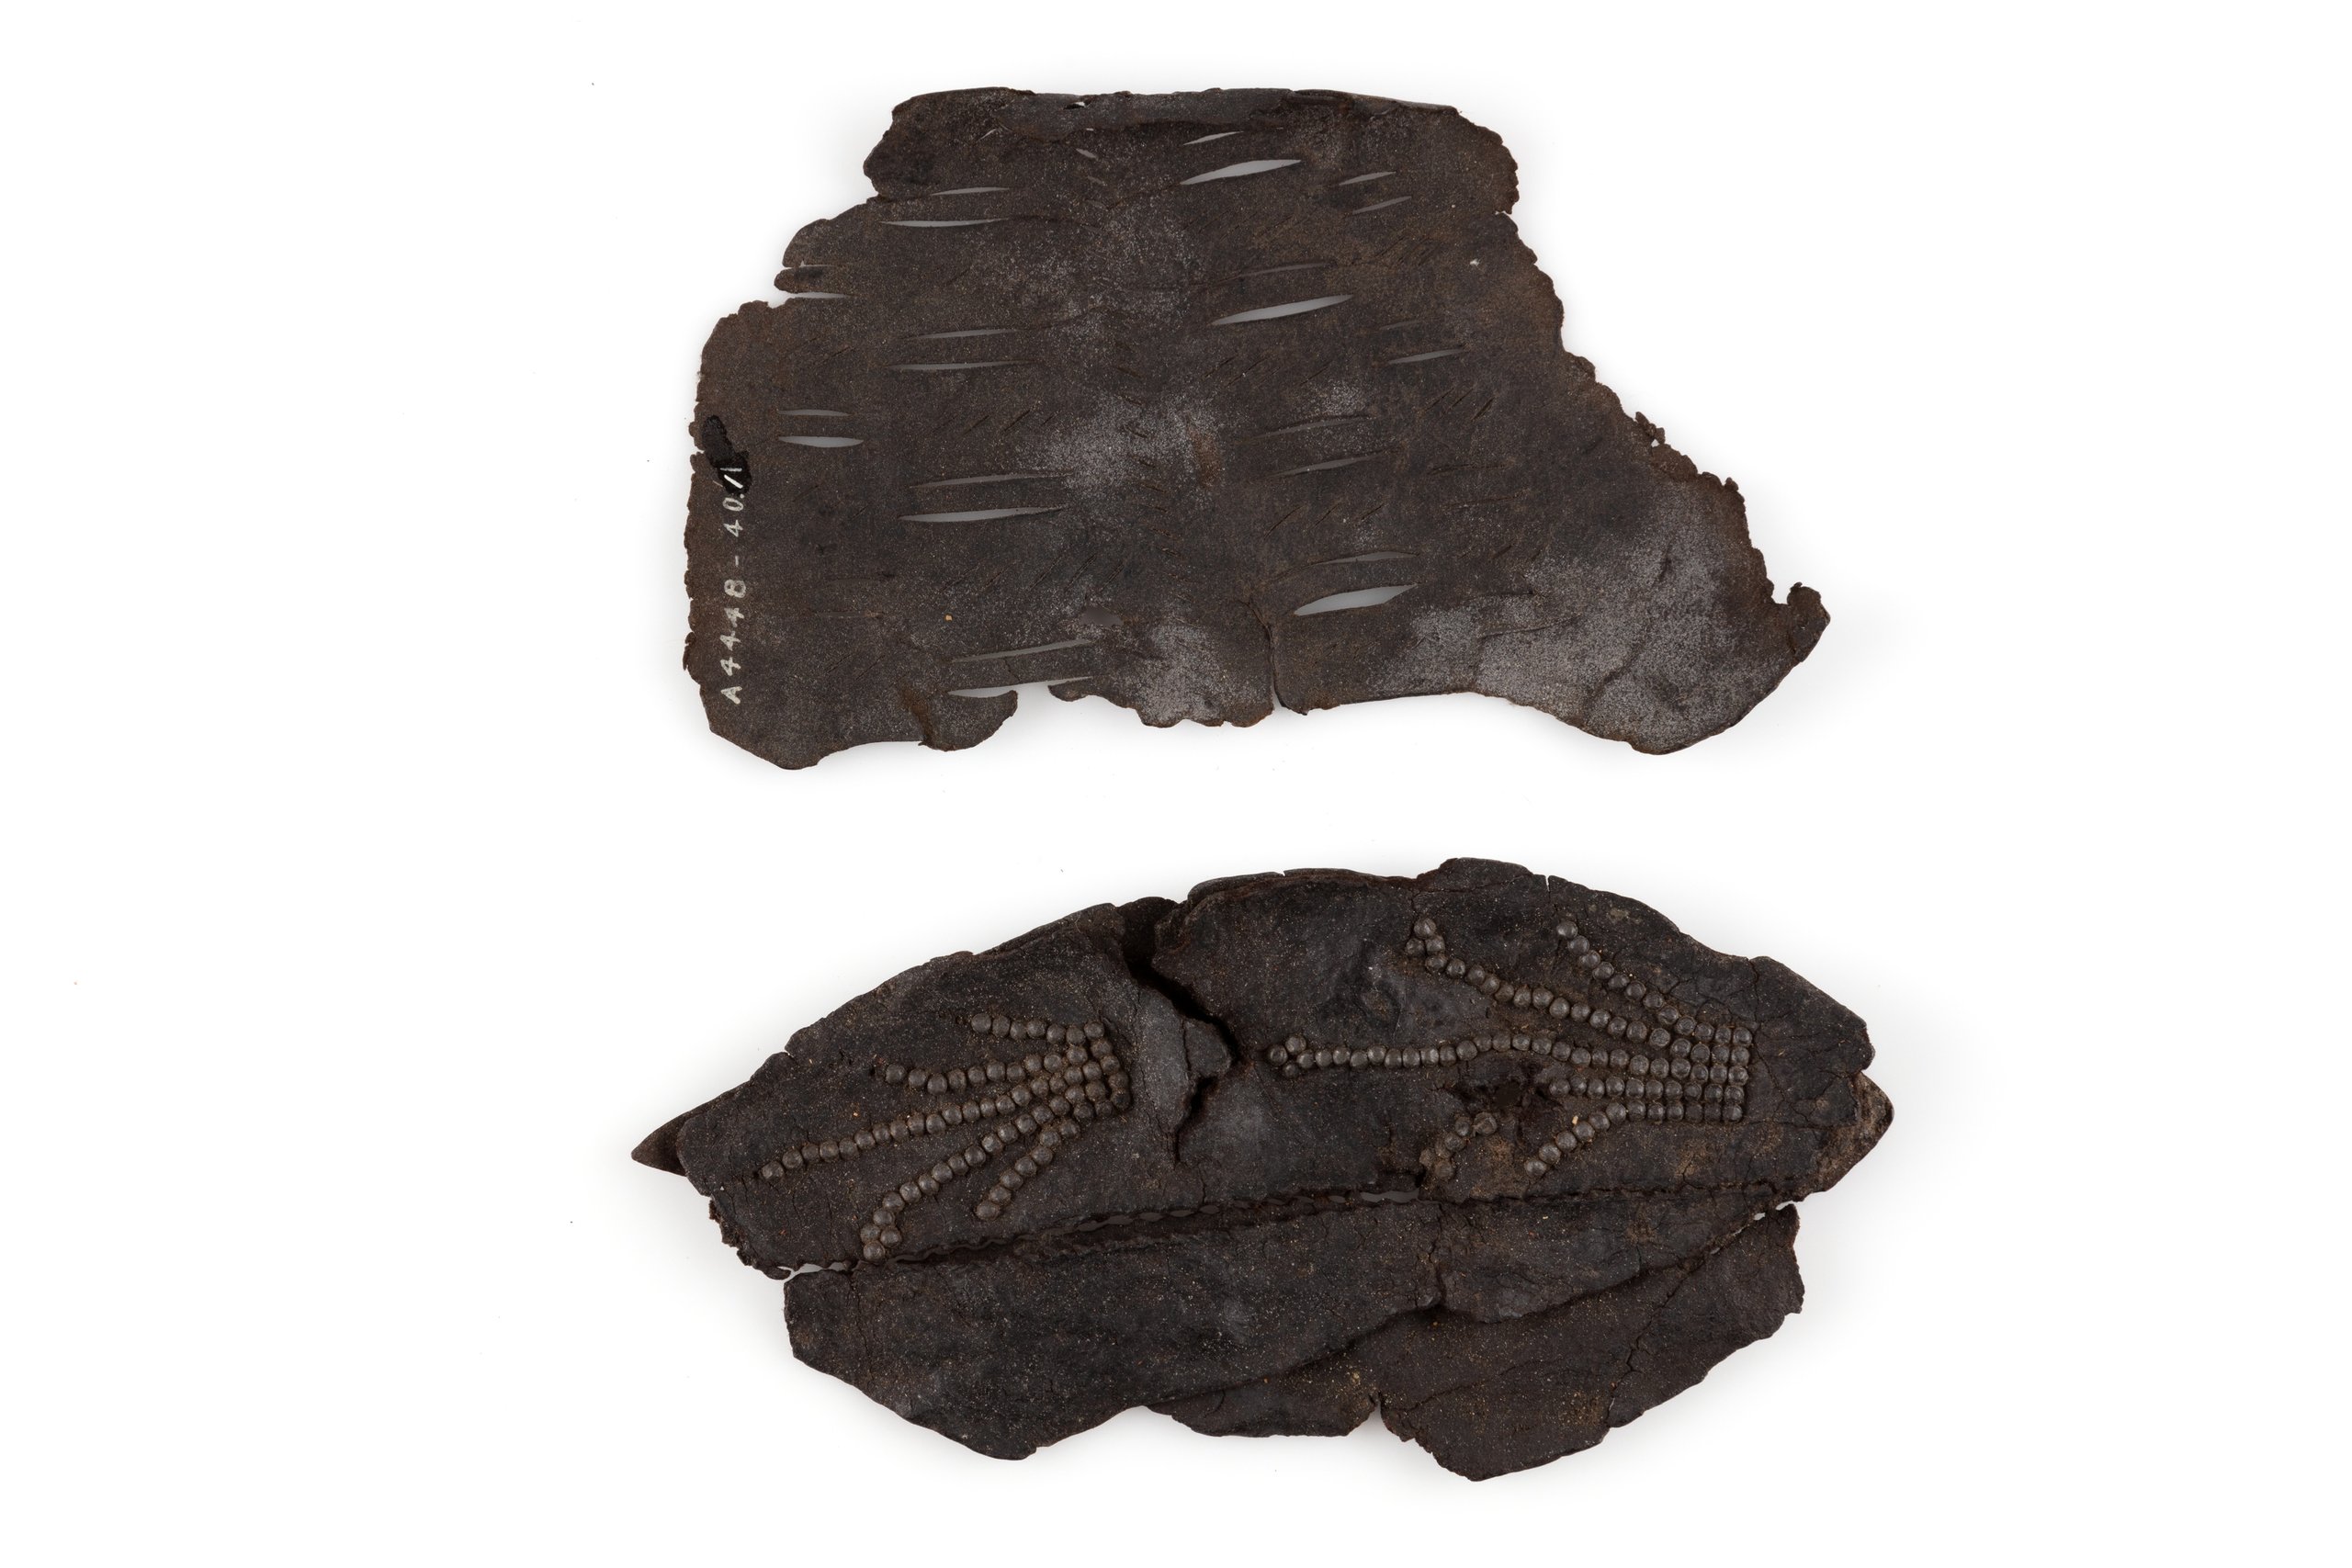 Shoe vamp and gament fragments from the Joseph Box collection